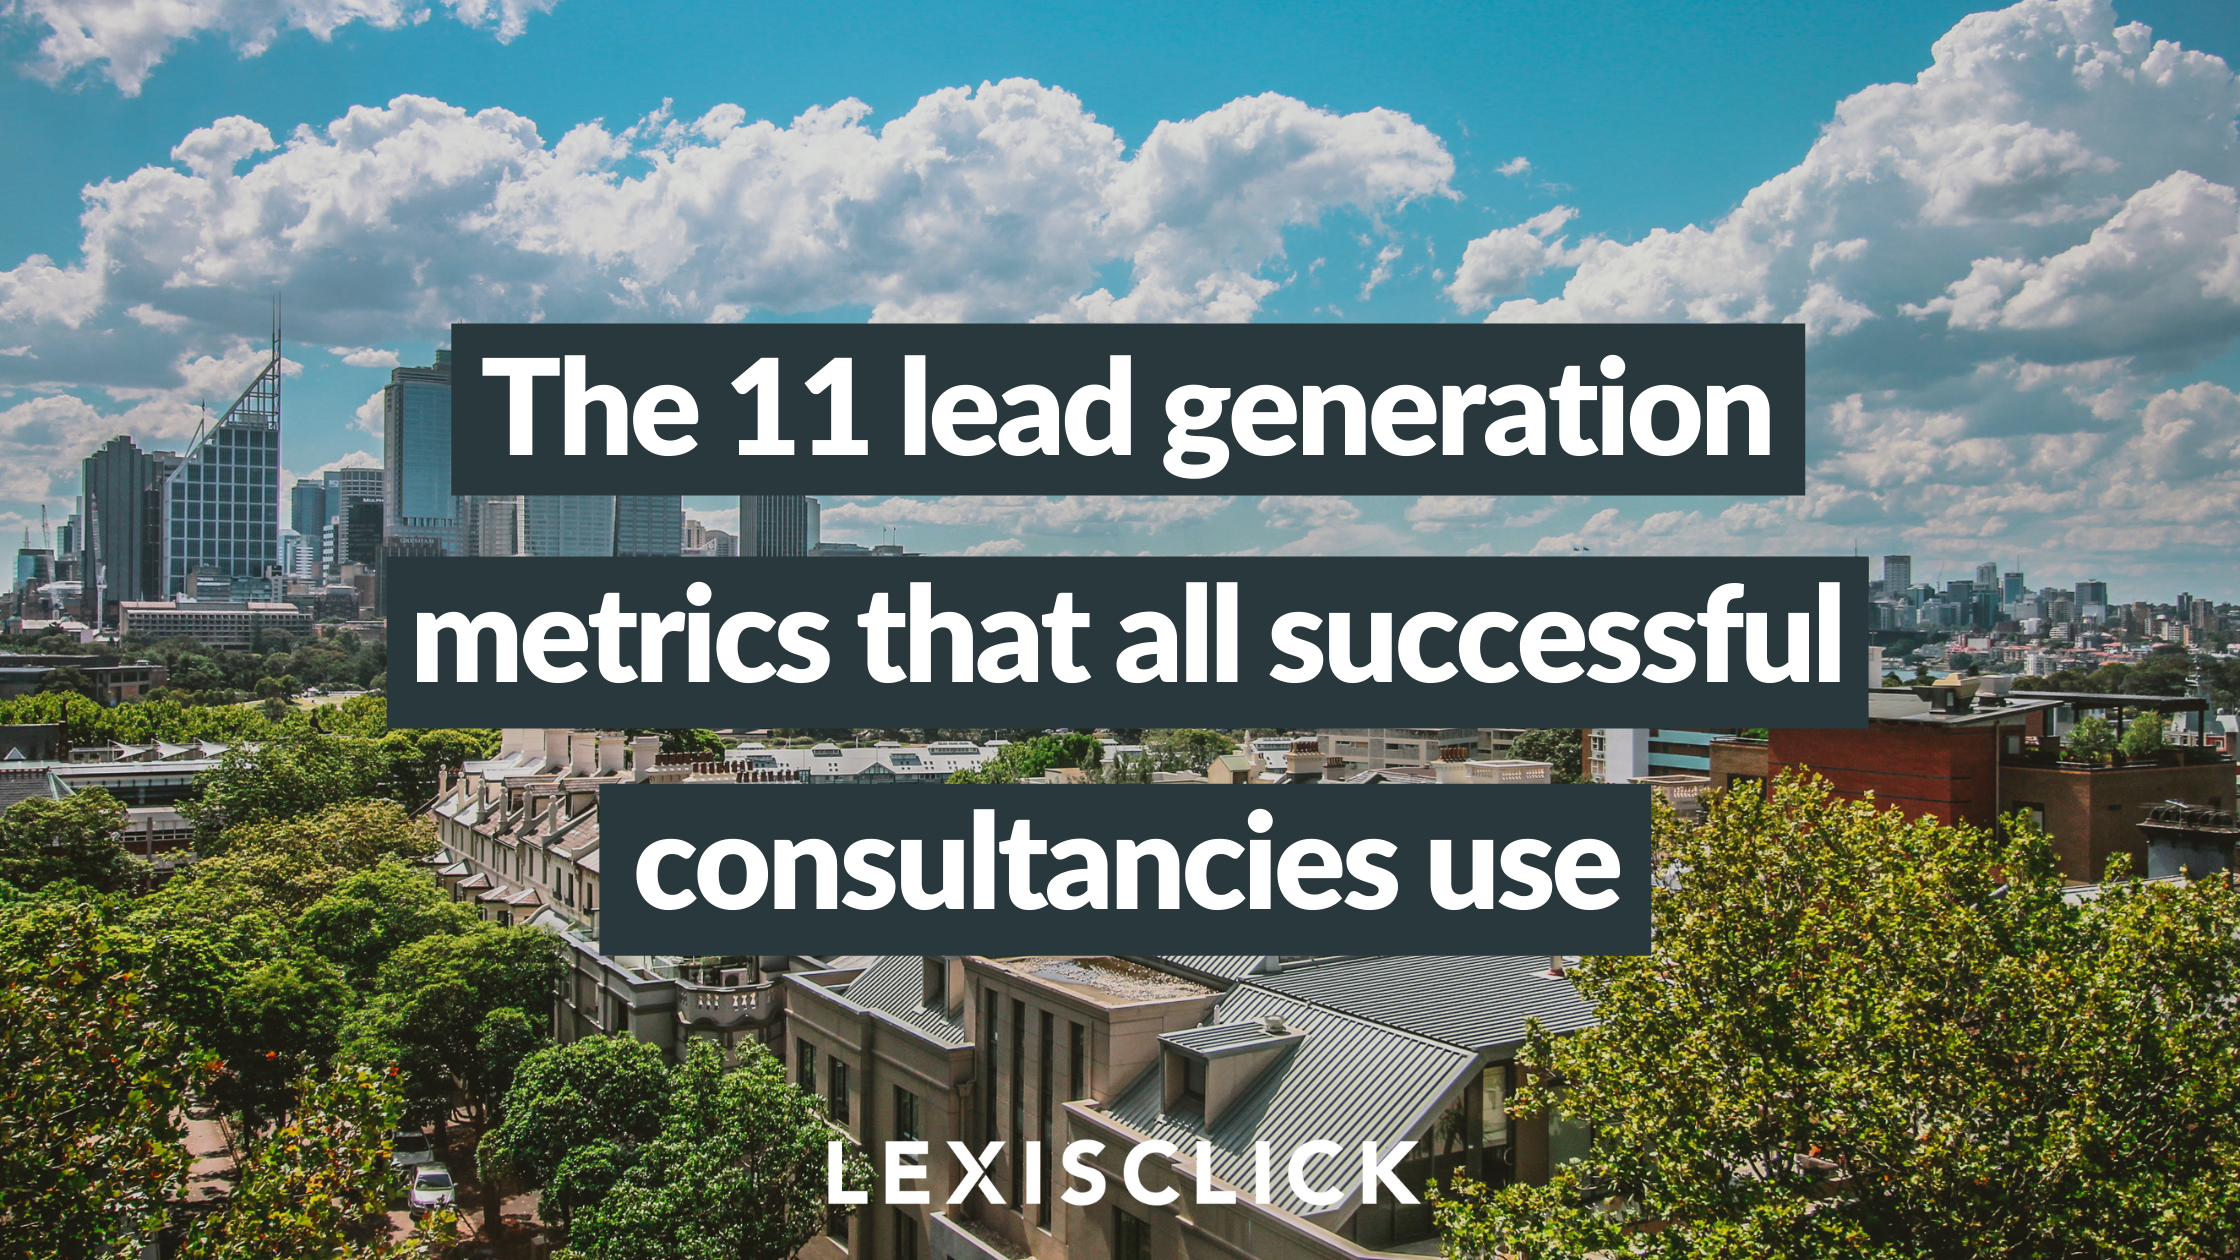 The 11 lead generation metrics that all successful consultancies use